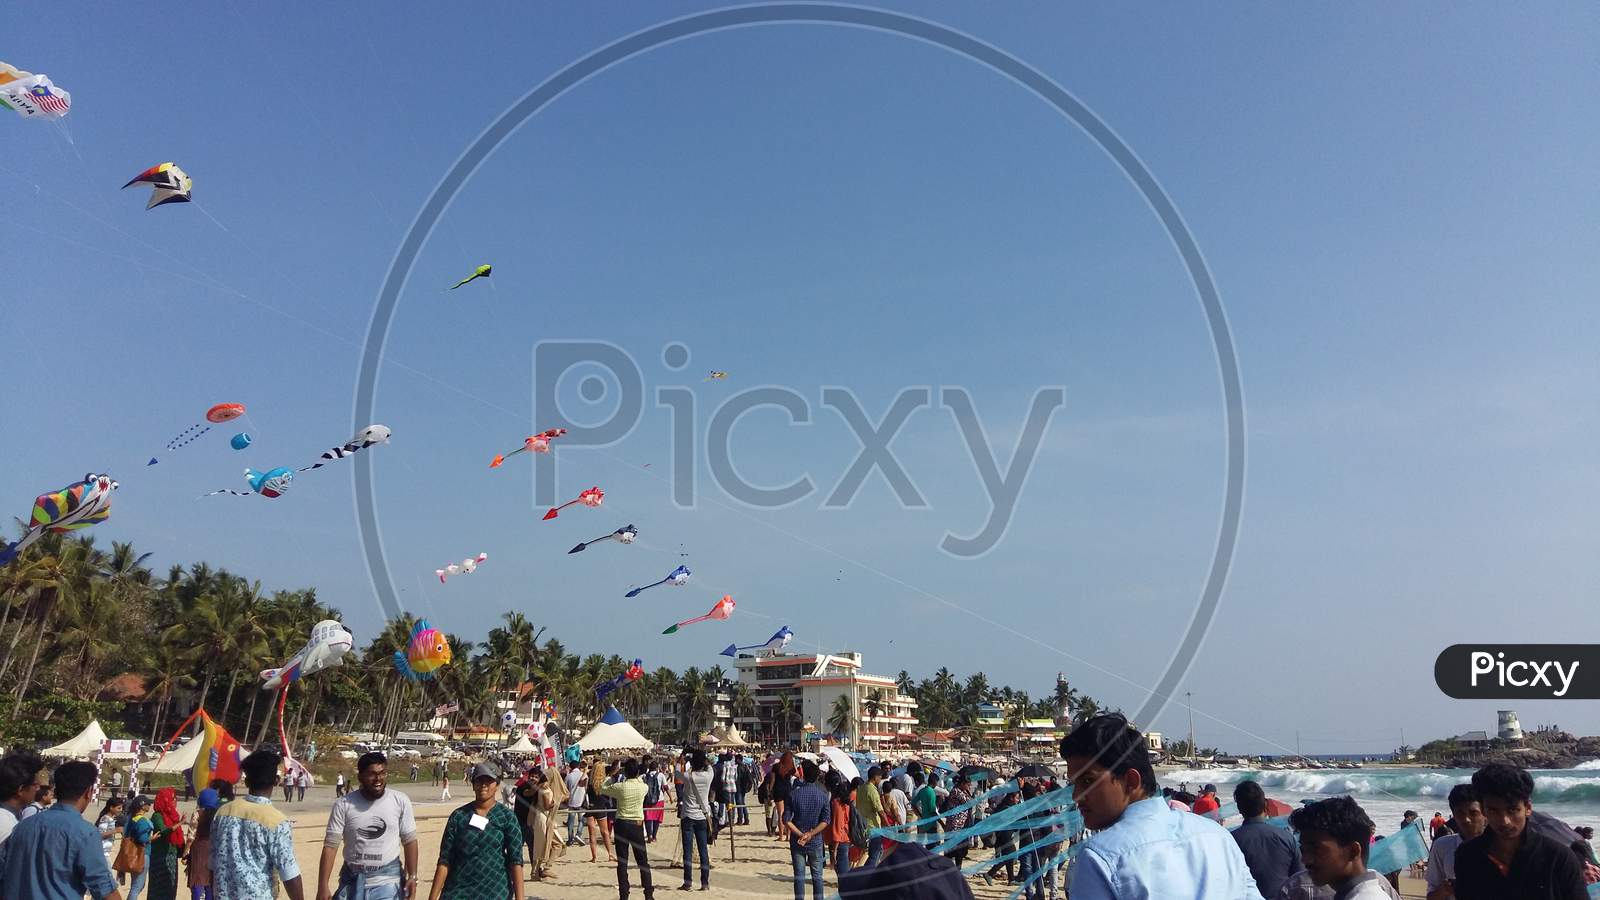 people flying kites on the beach